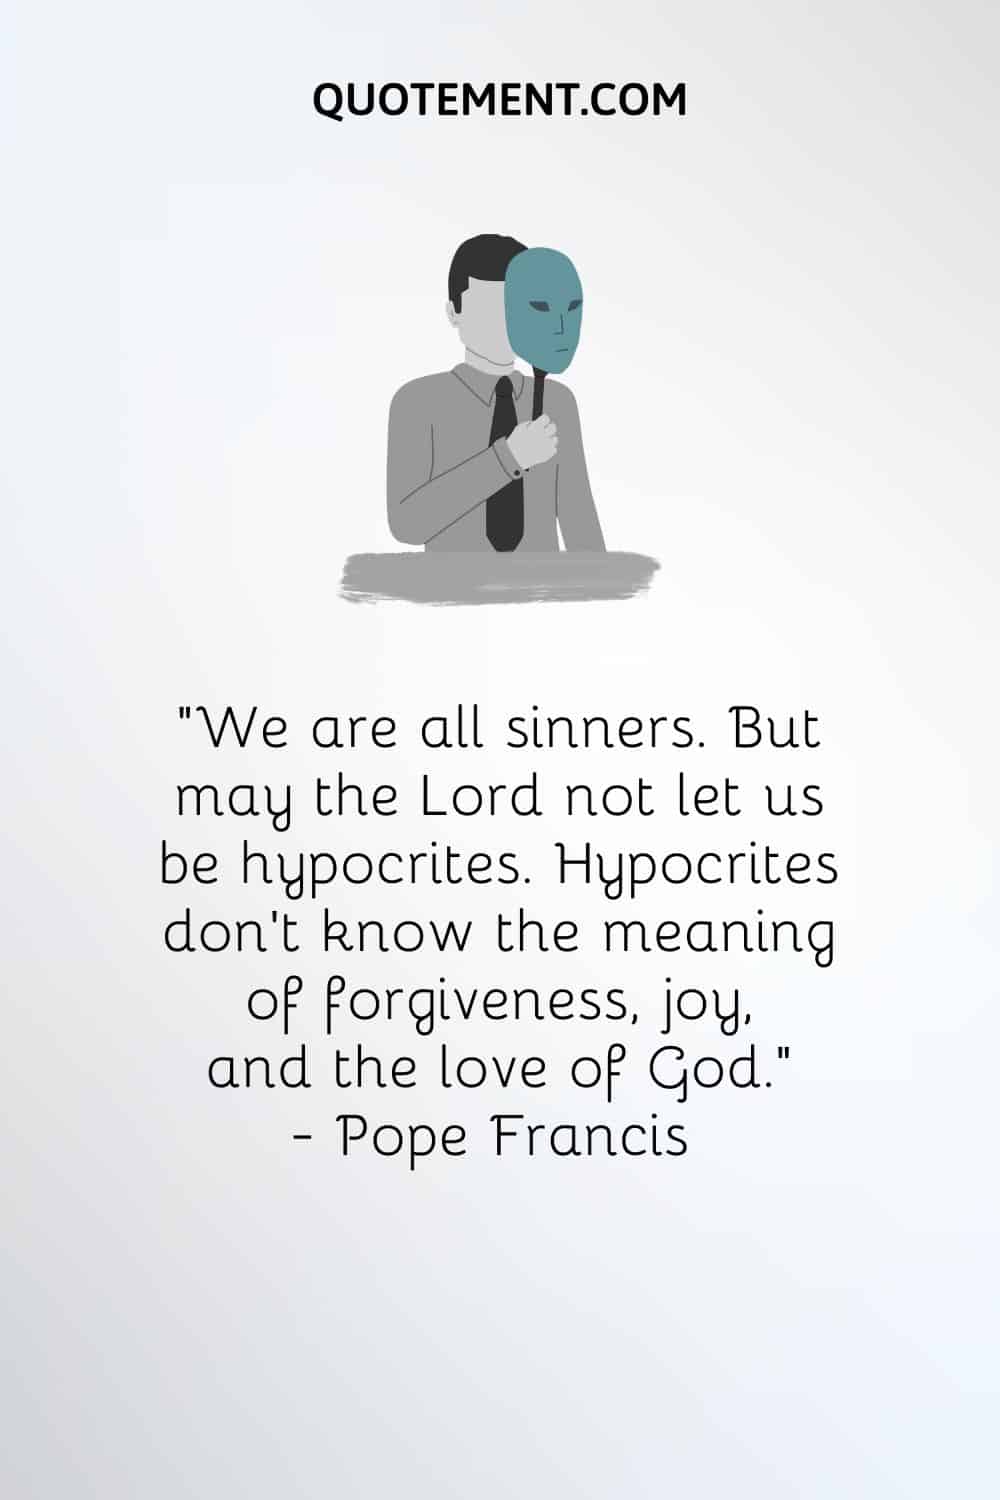 “We are all sinners. But may the Lord not let us be hypocrites. Hypocrites don’t know the meaning of forgiveness, joy, and the love of God.” — Pope Francis